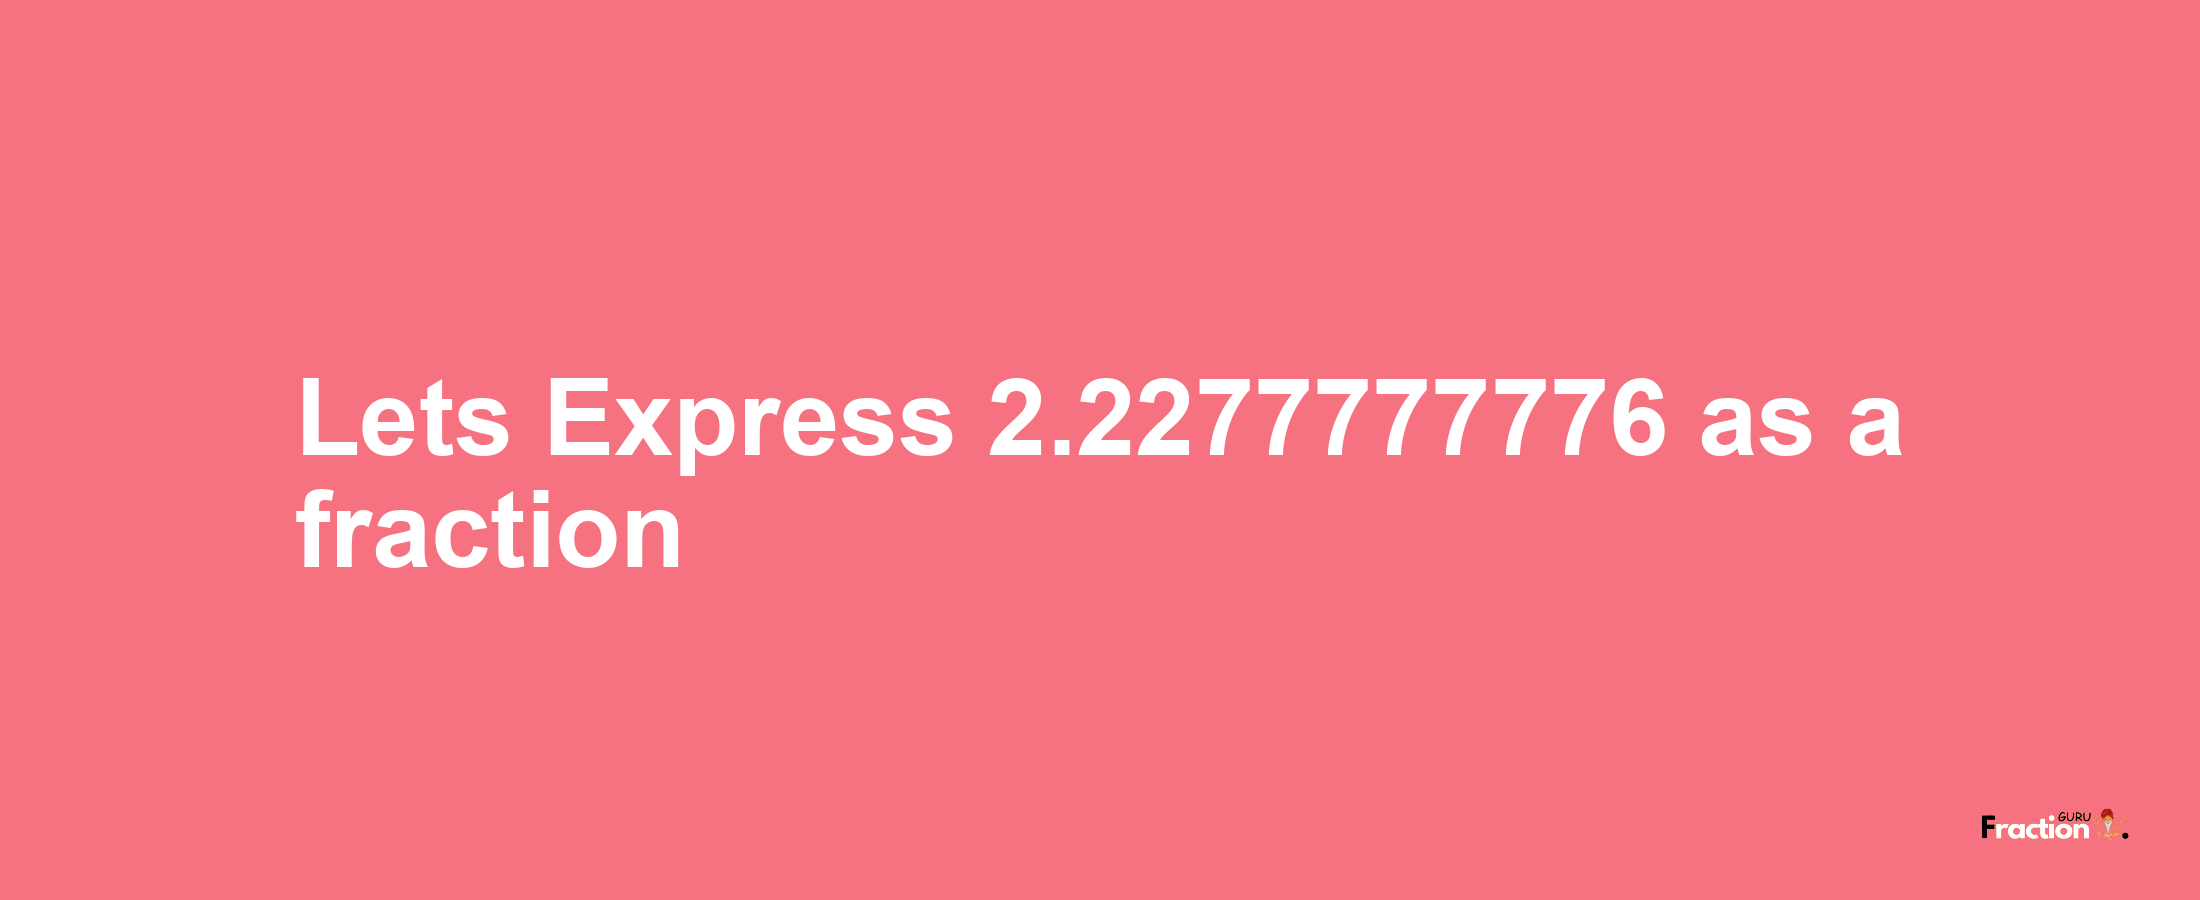 Lets Express 2.2277777776 as afraction